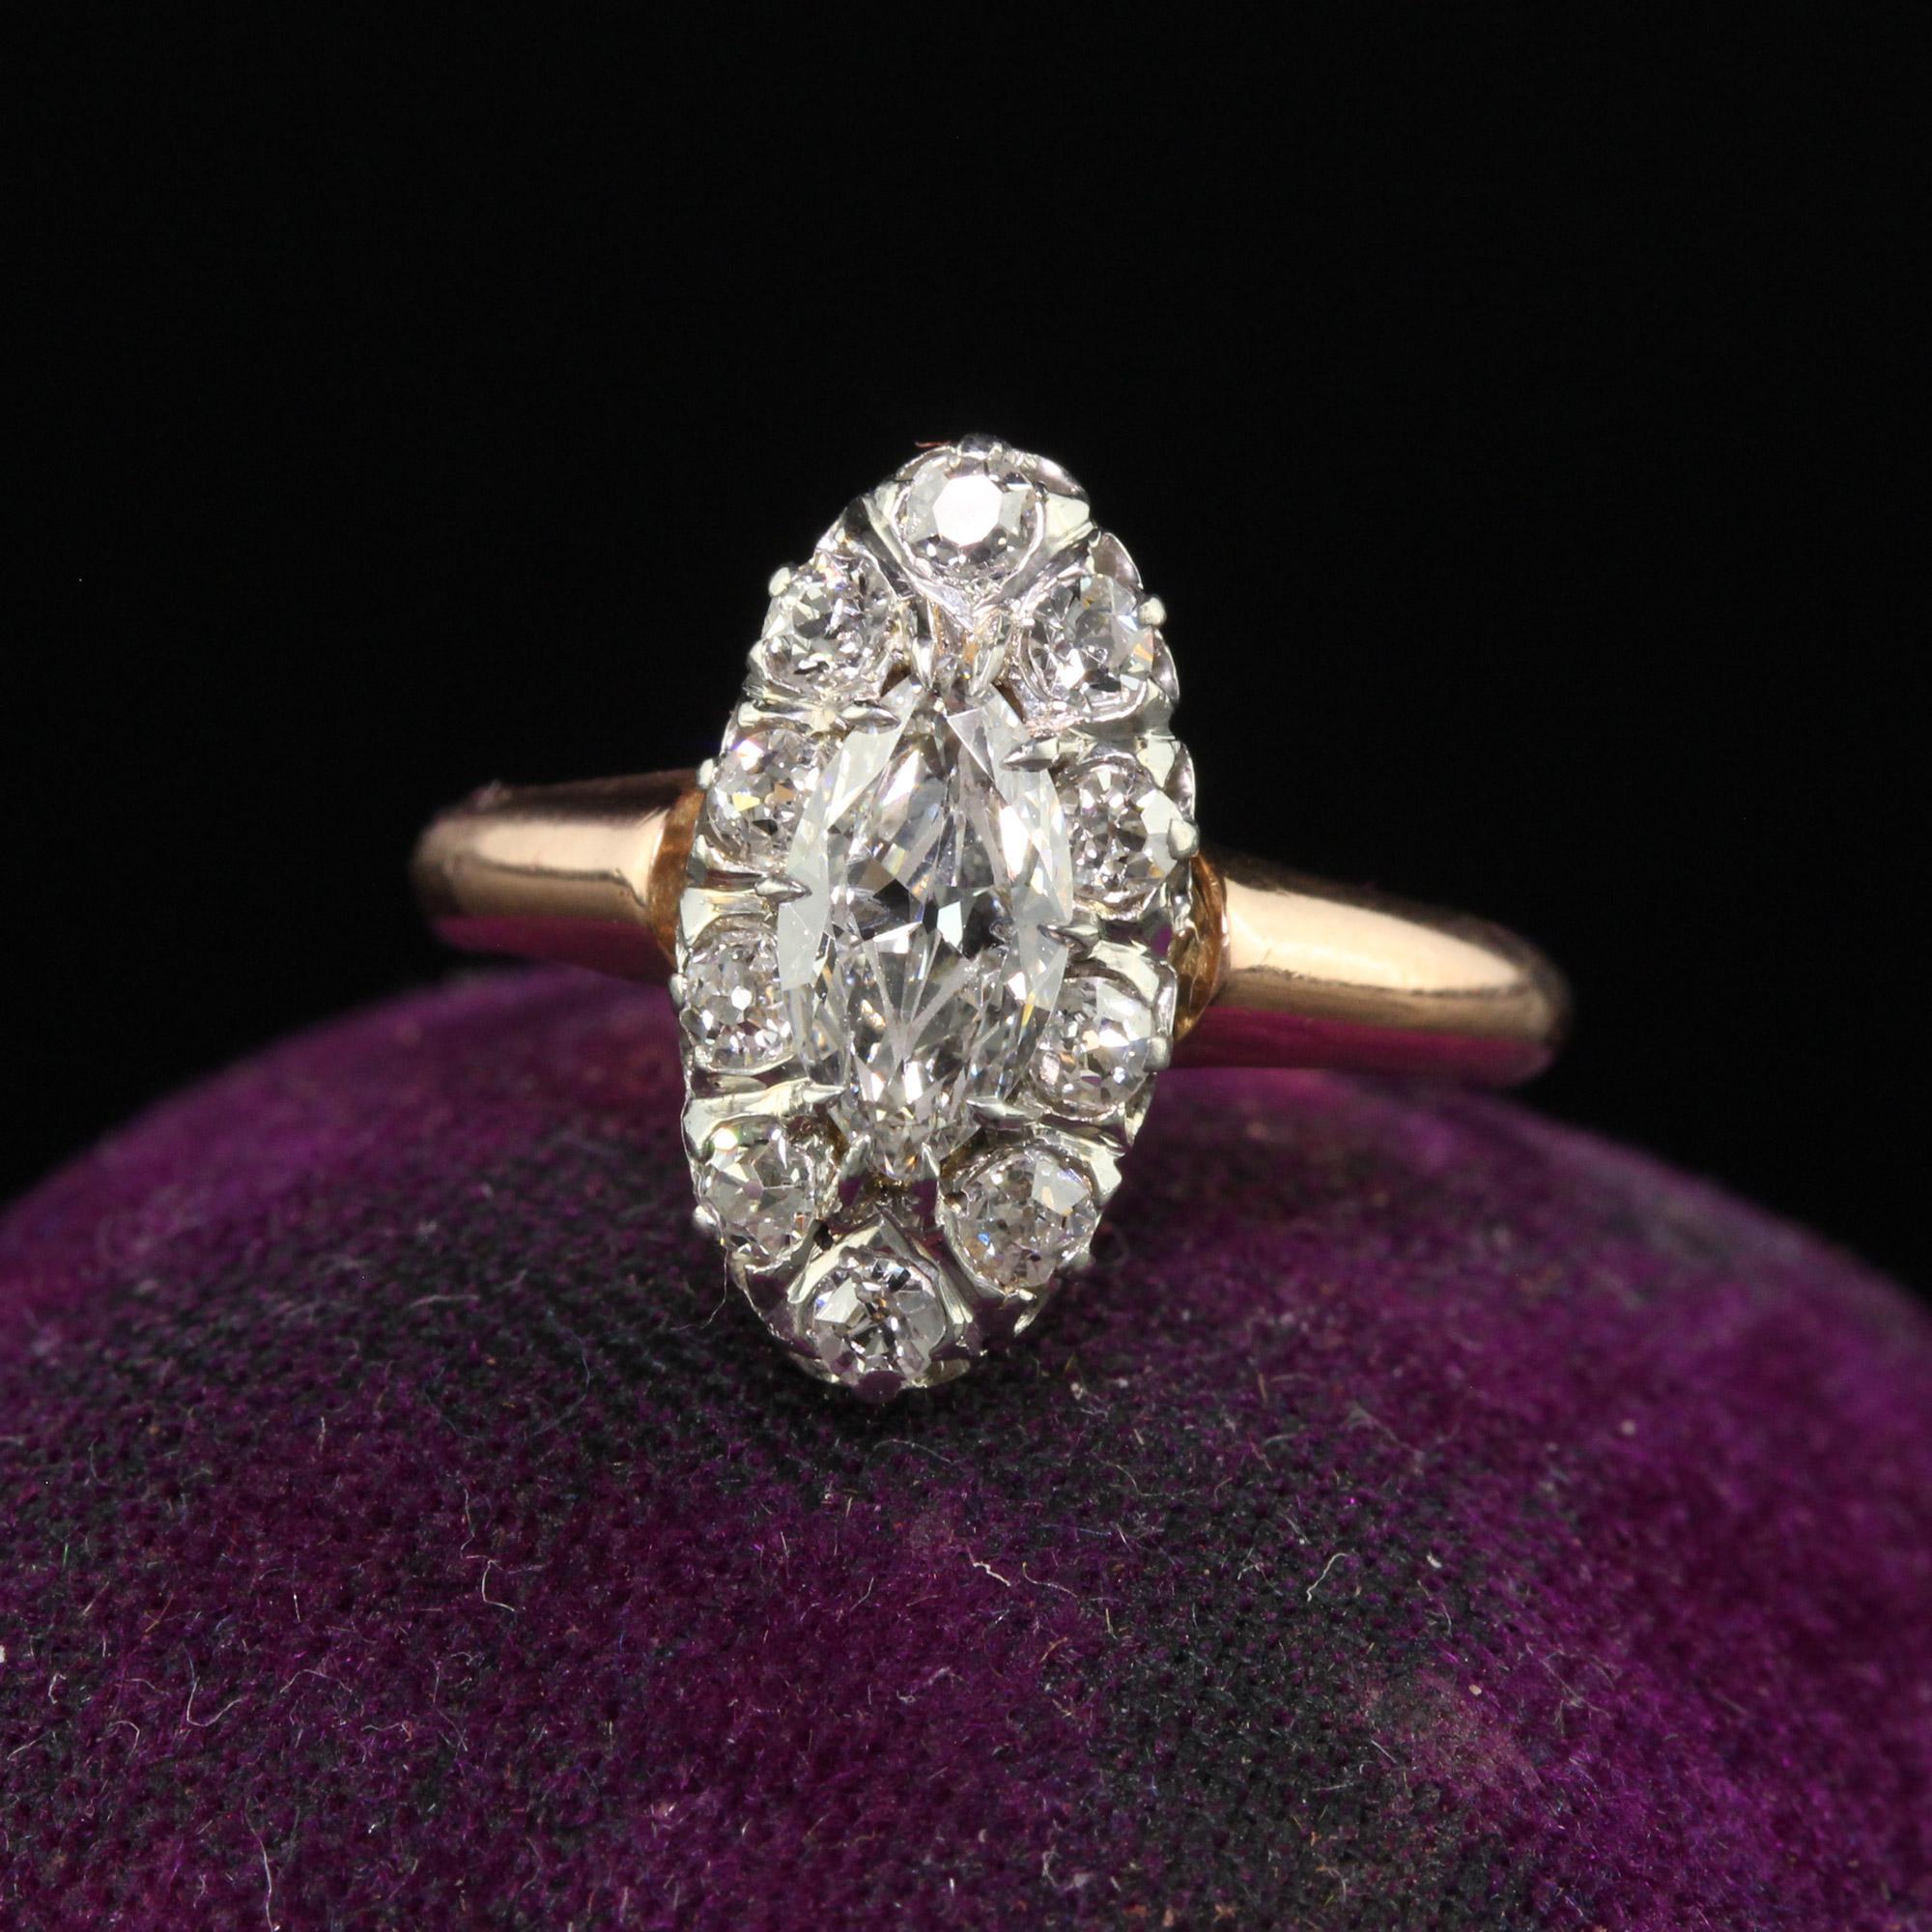 Beautiful Antique Edwardian French 18K Rose Gold Platinum Old Euro Marquise Engagement Ring. This gorgeous engagement ring is crafted in 18k rose gold and platinum top. The center holds an old cut marquise diamond that has a GIA report. The center